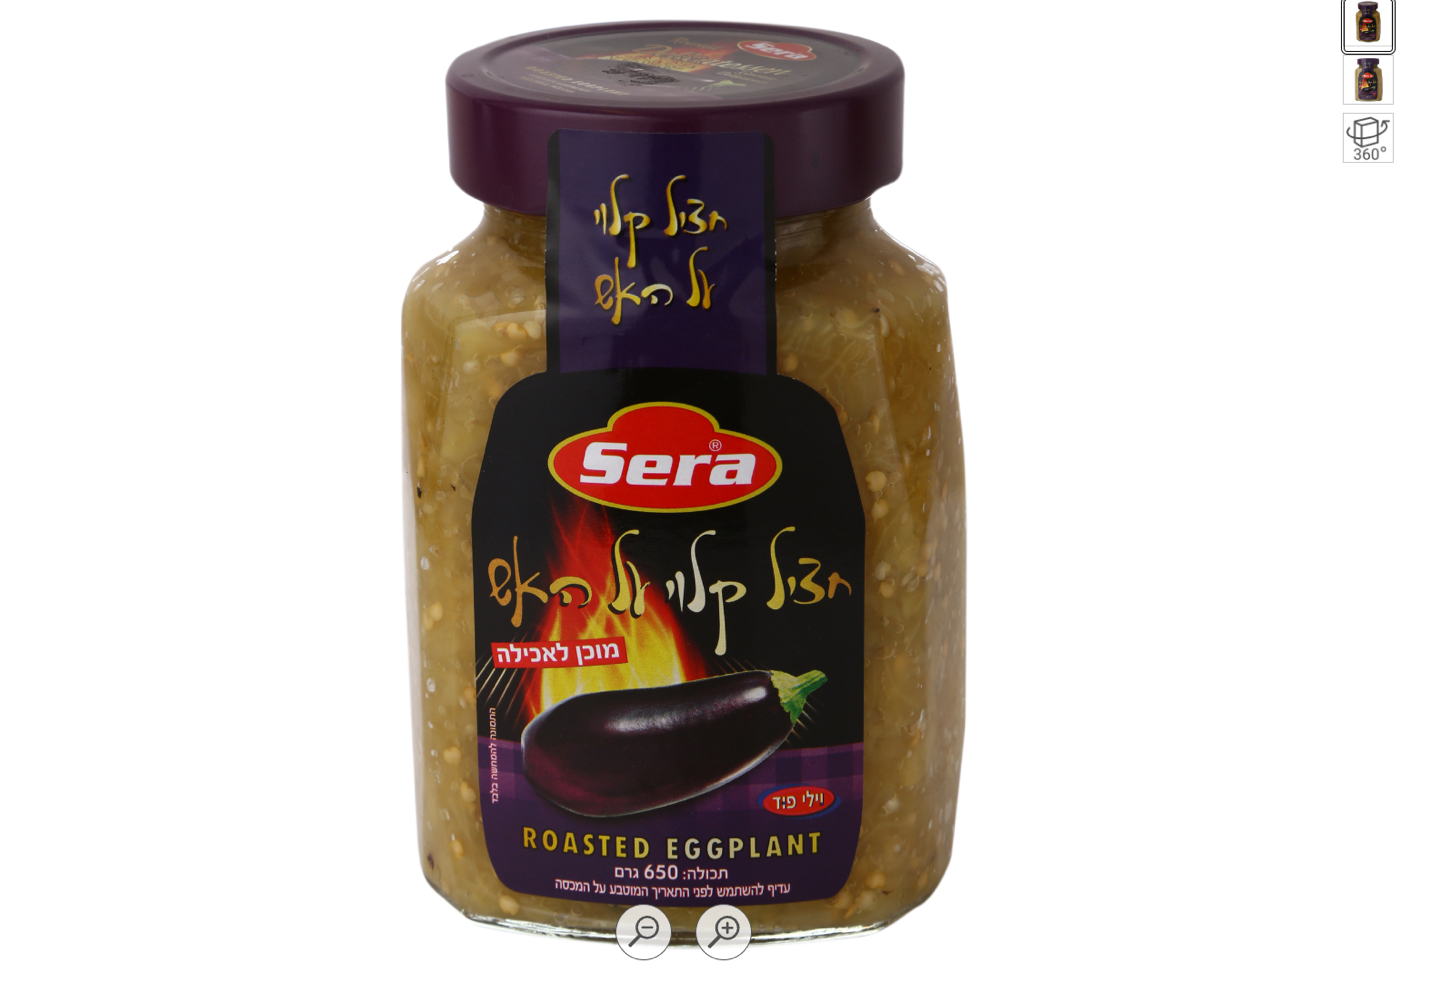 A jar of eggplant with a label

Description automatically generated